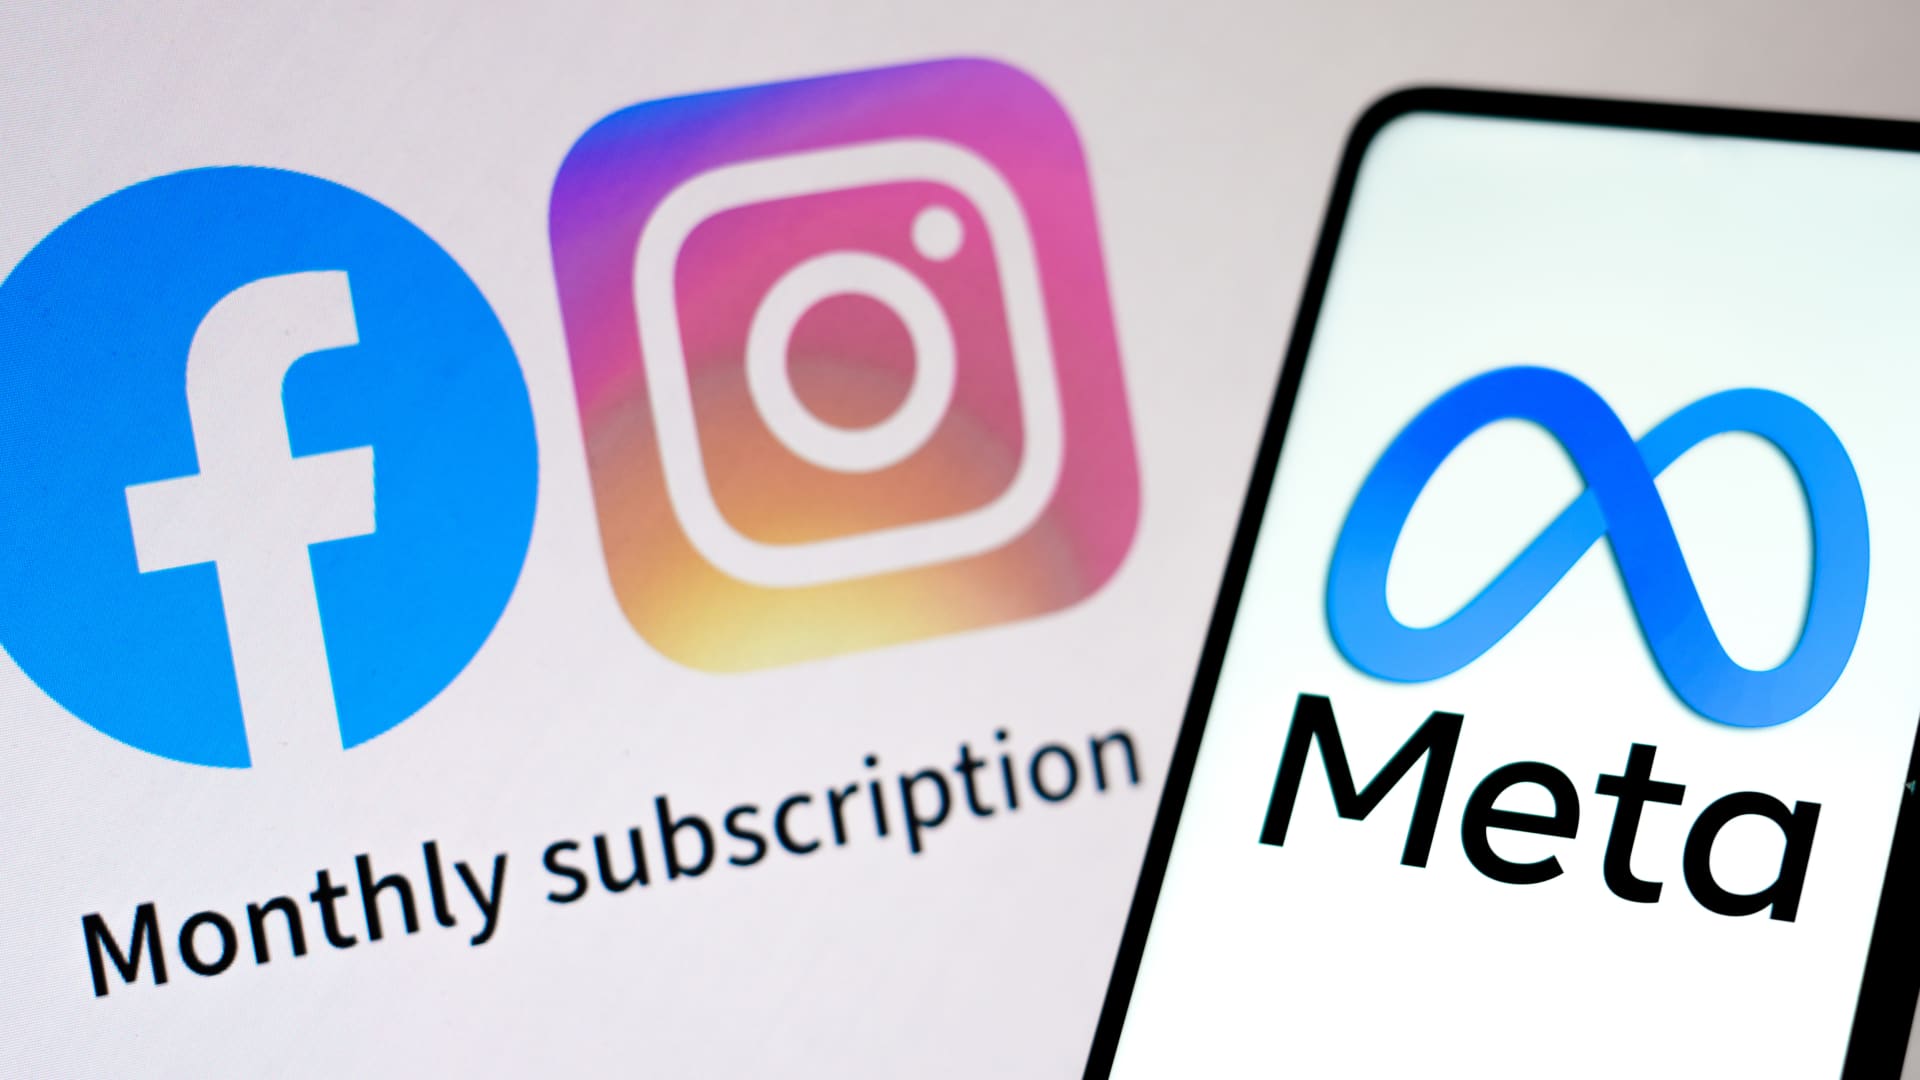 Meta wants to charge European users for ad-free Instagram, Facebook: Report